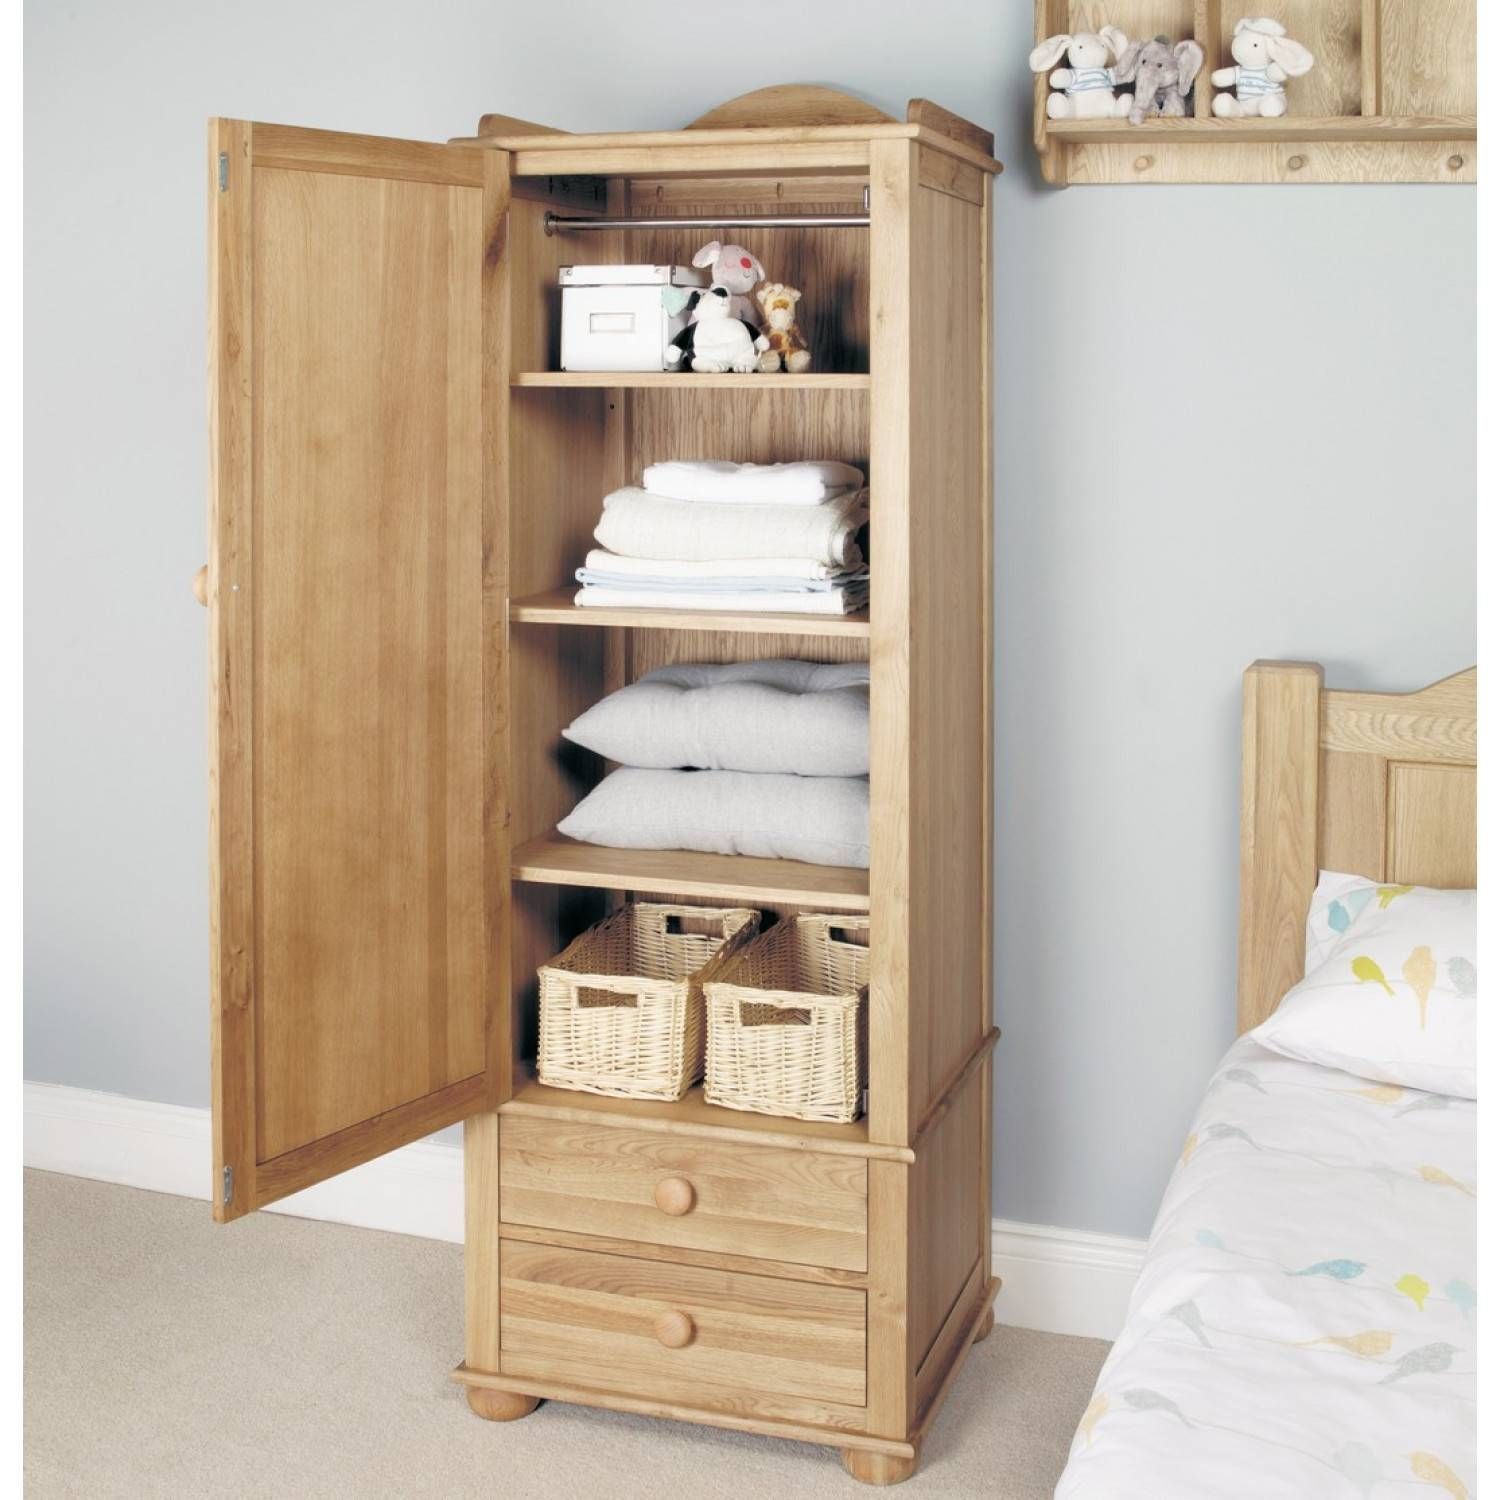 Solid Oak Childrens Single Wardrobe Inside Childrens Wardrobes With Drawers And Shelves (View 20 of 30)